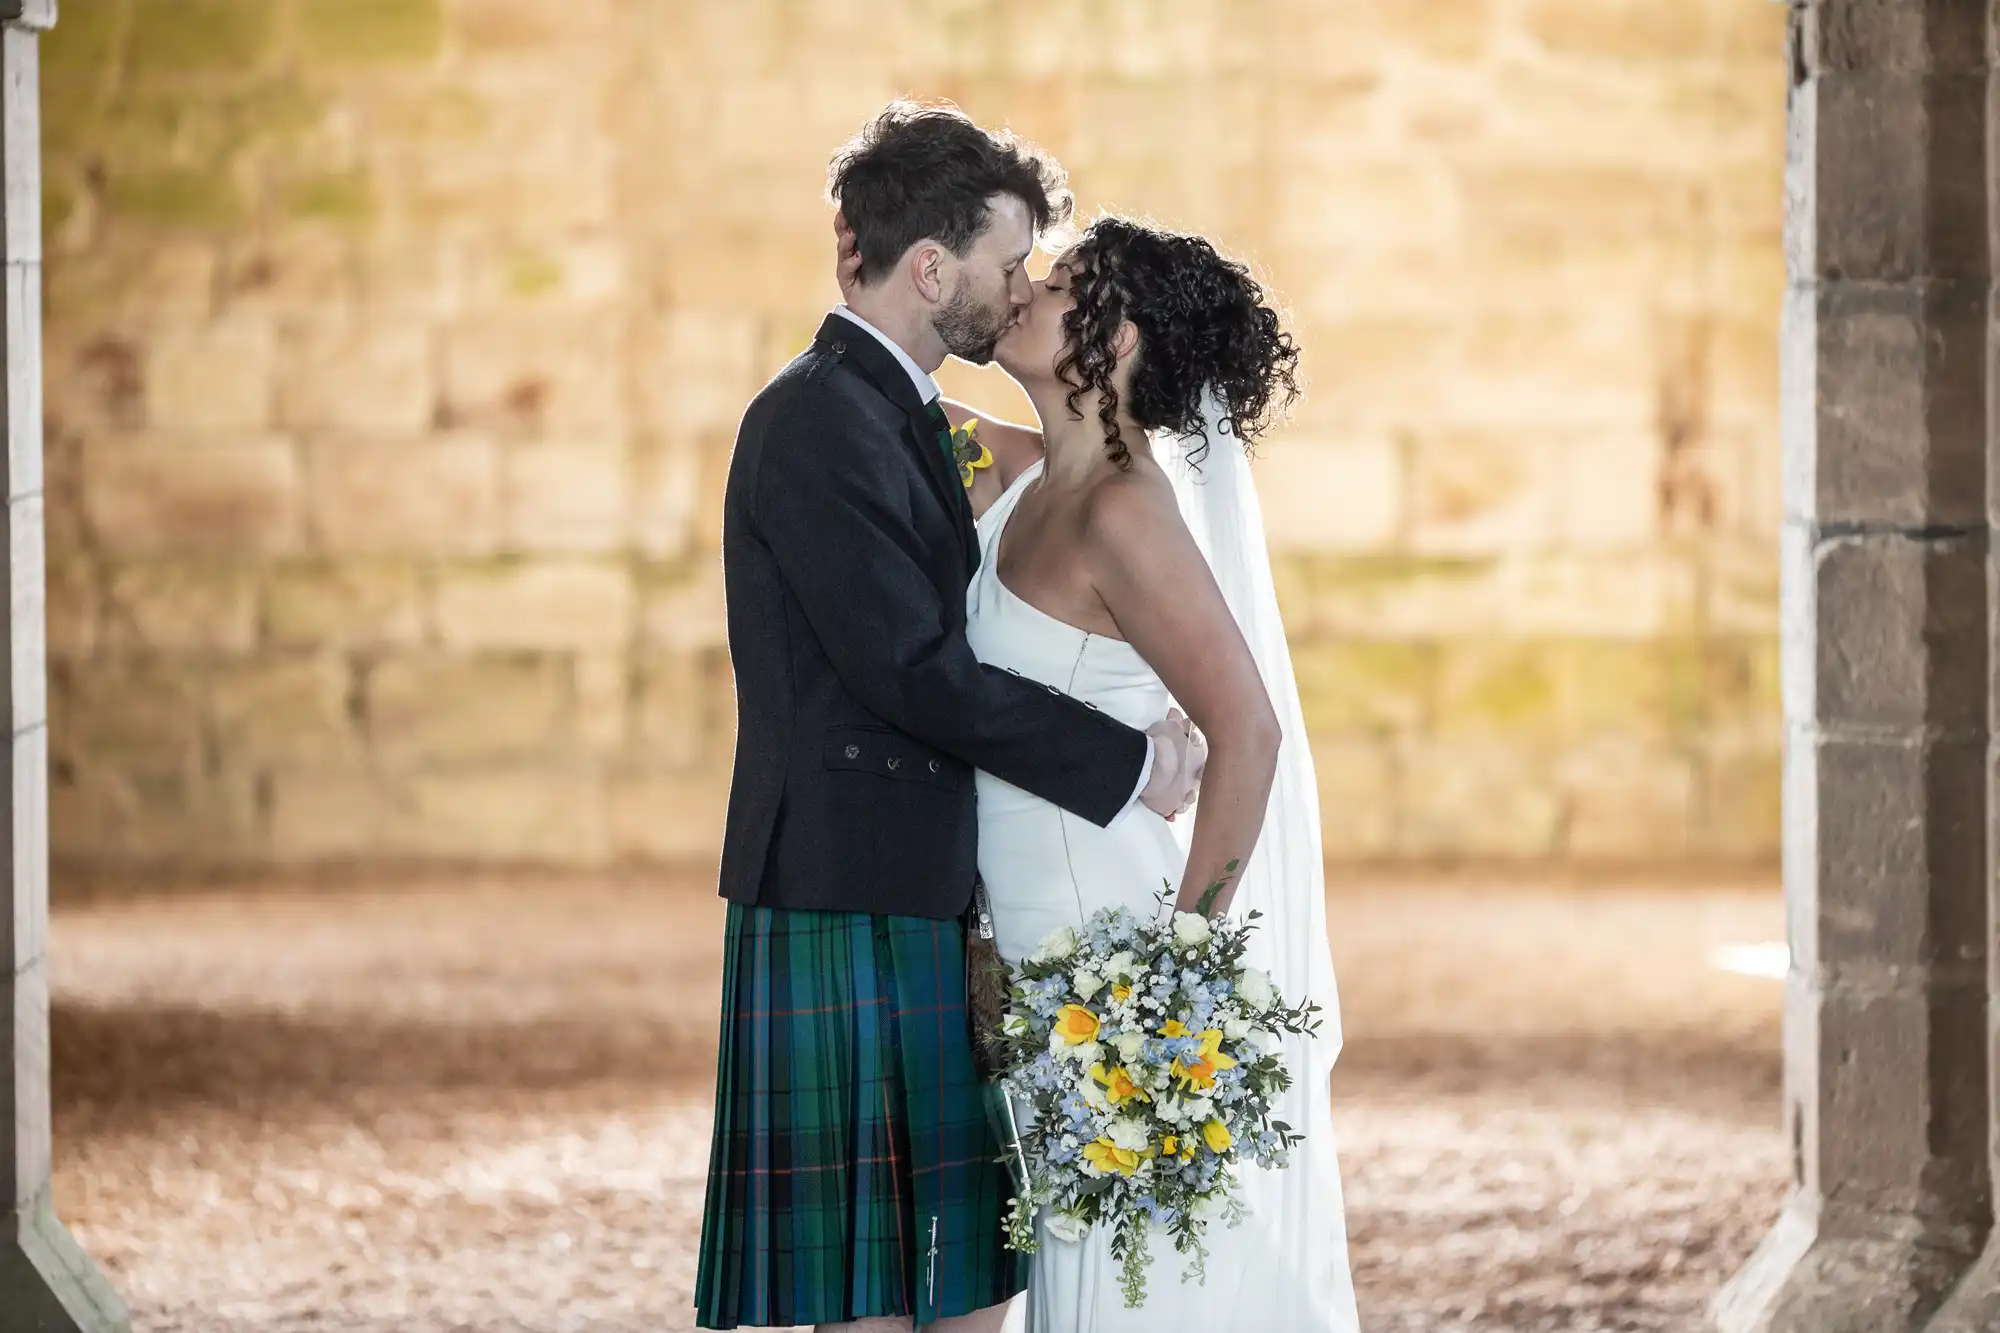 Dunglass Estate recommended wedding photographer for Livv and Neil’s big day